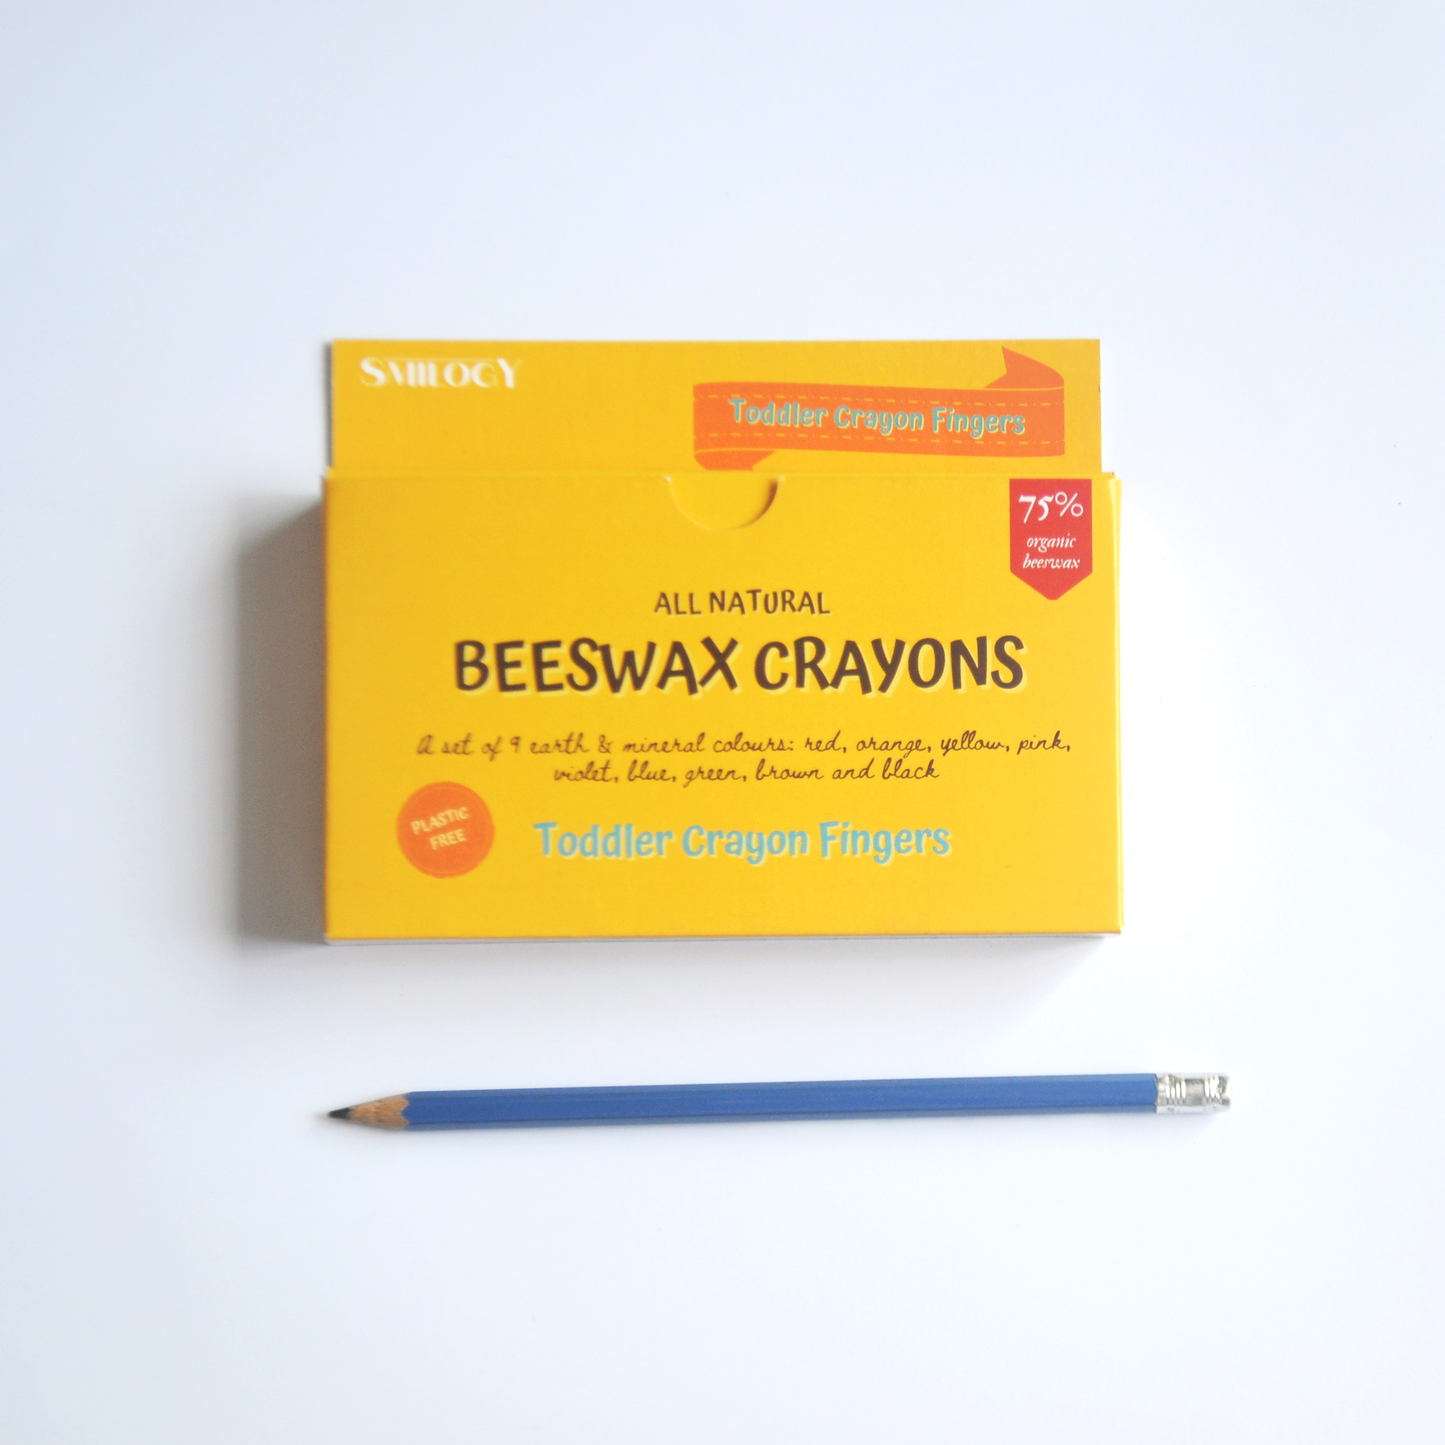 Non-Toxic Handmade Beeswax Crayon Fingers Closed Box with a pencil to see size 